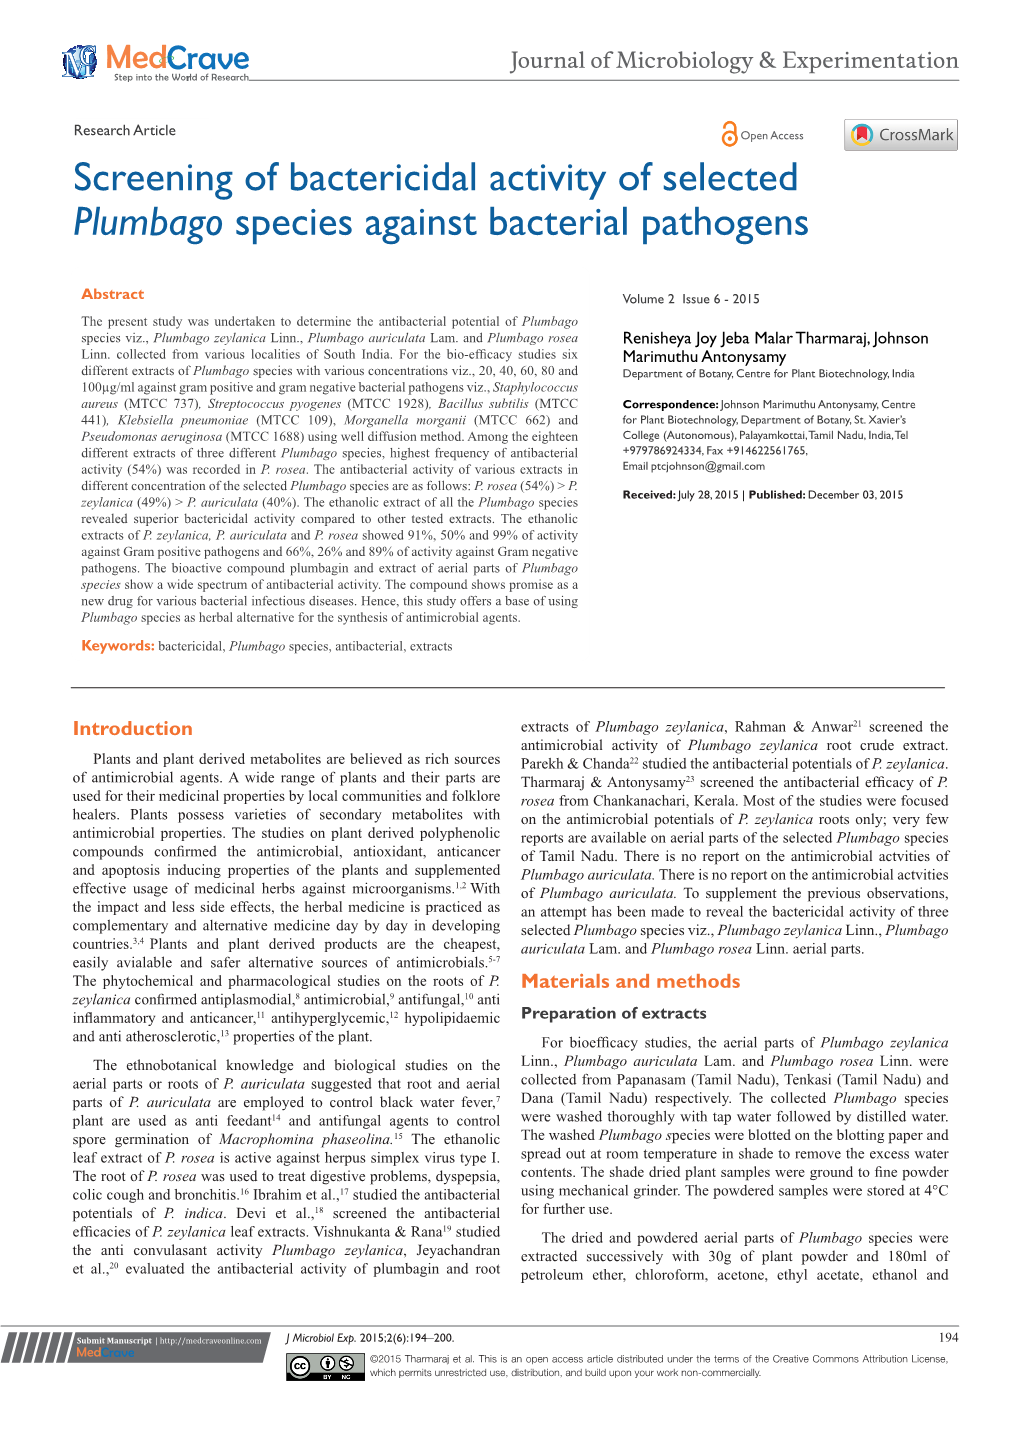 Screening of Bactericidal Activity of Selected Plumbago Species Against Bacterial Pathogens